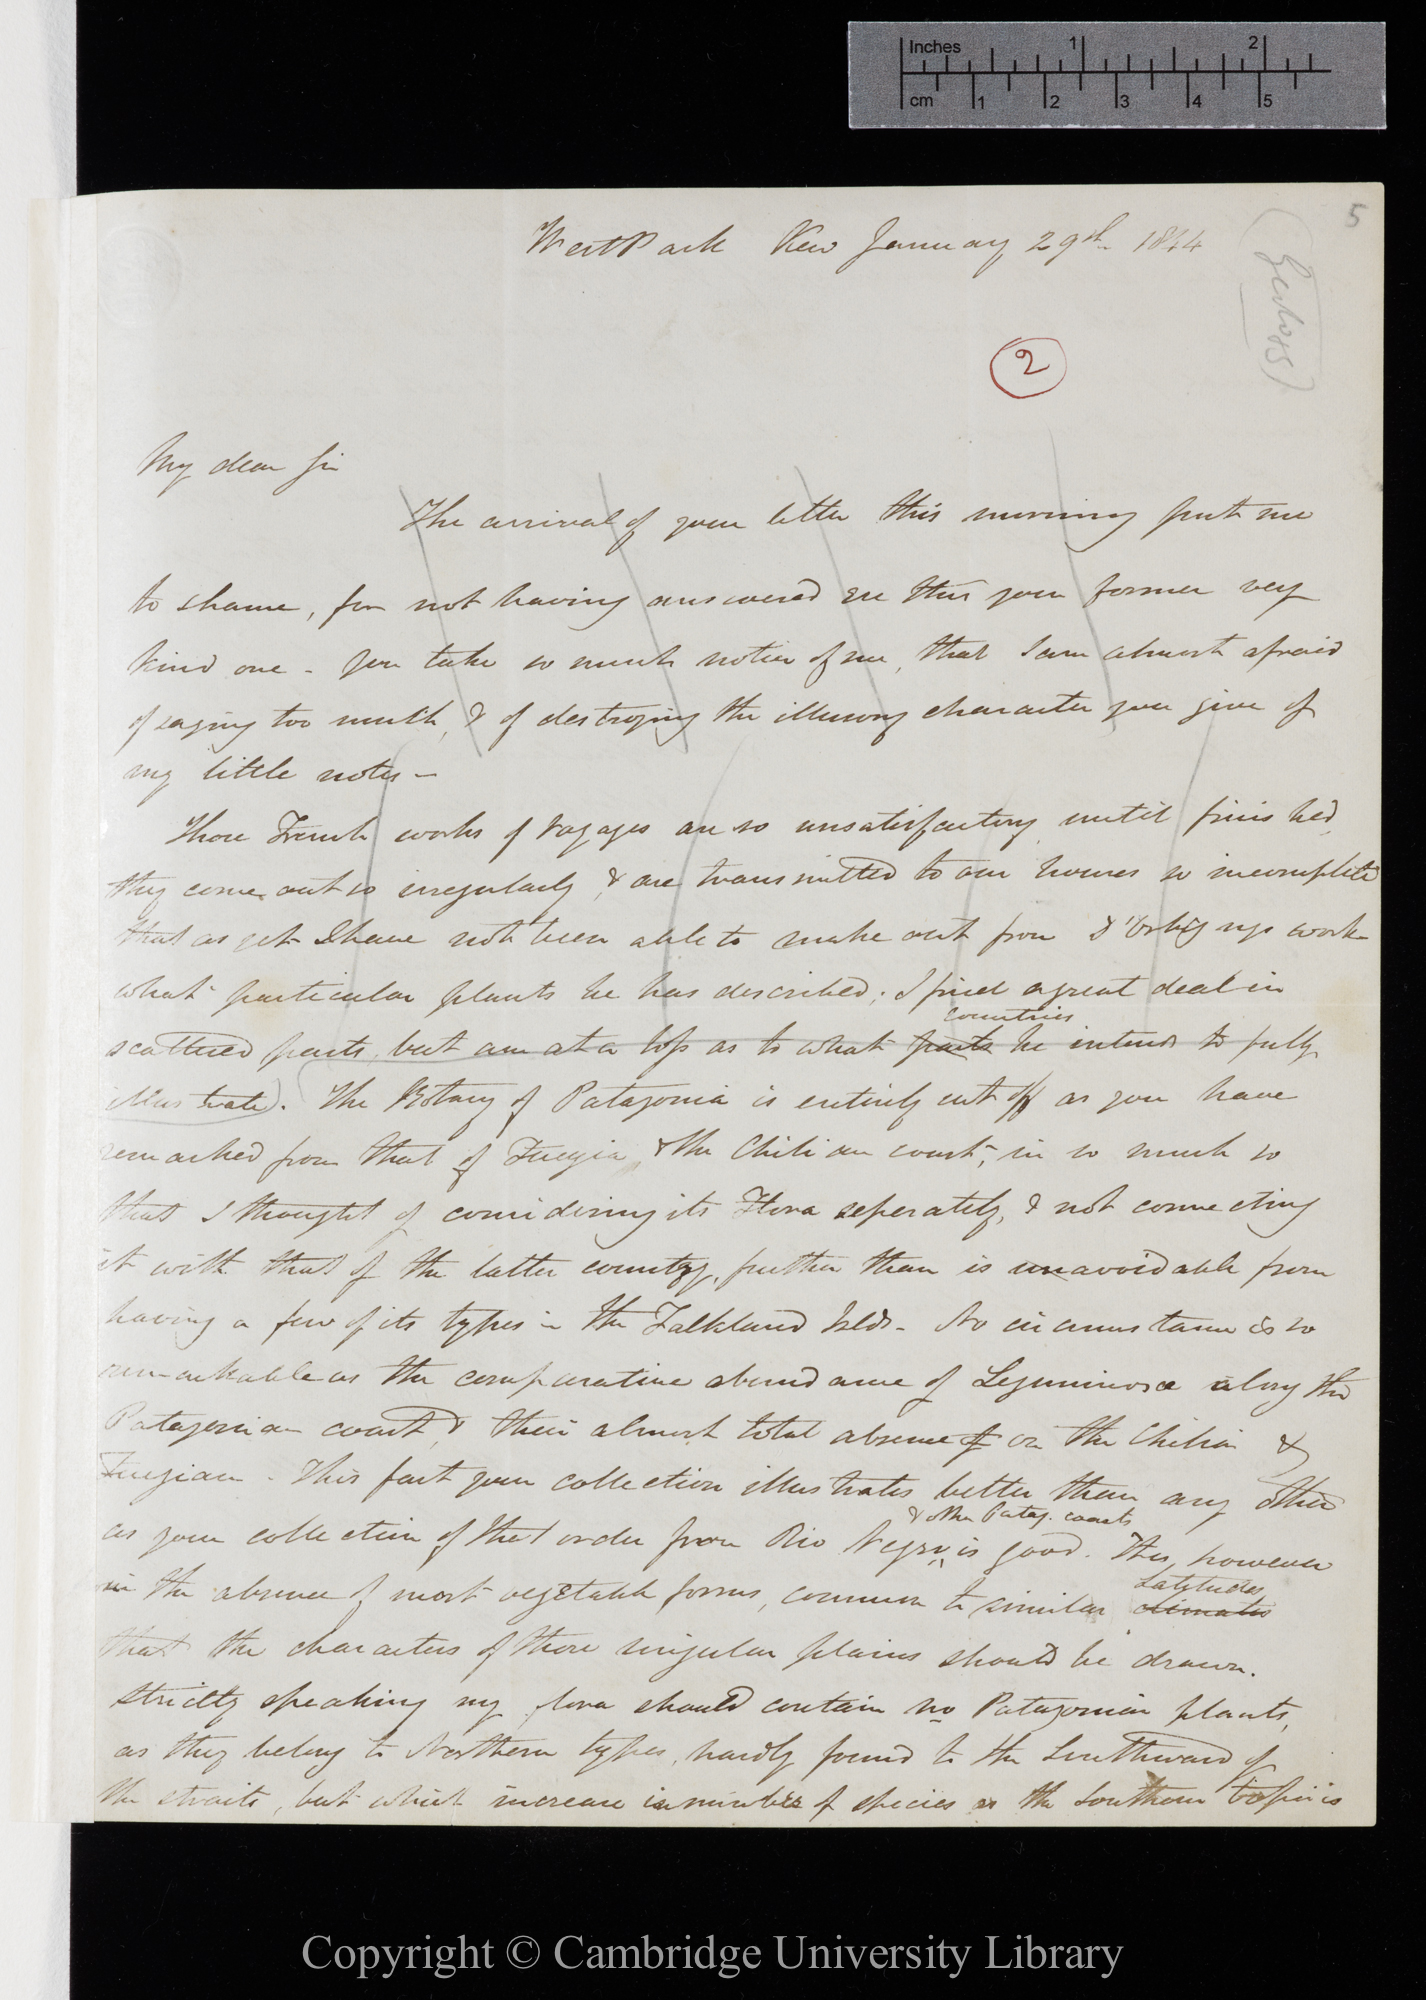 Letter from J. D. Hooker to C. R. Darwin   29 January 1844